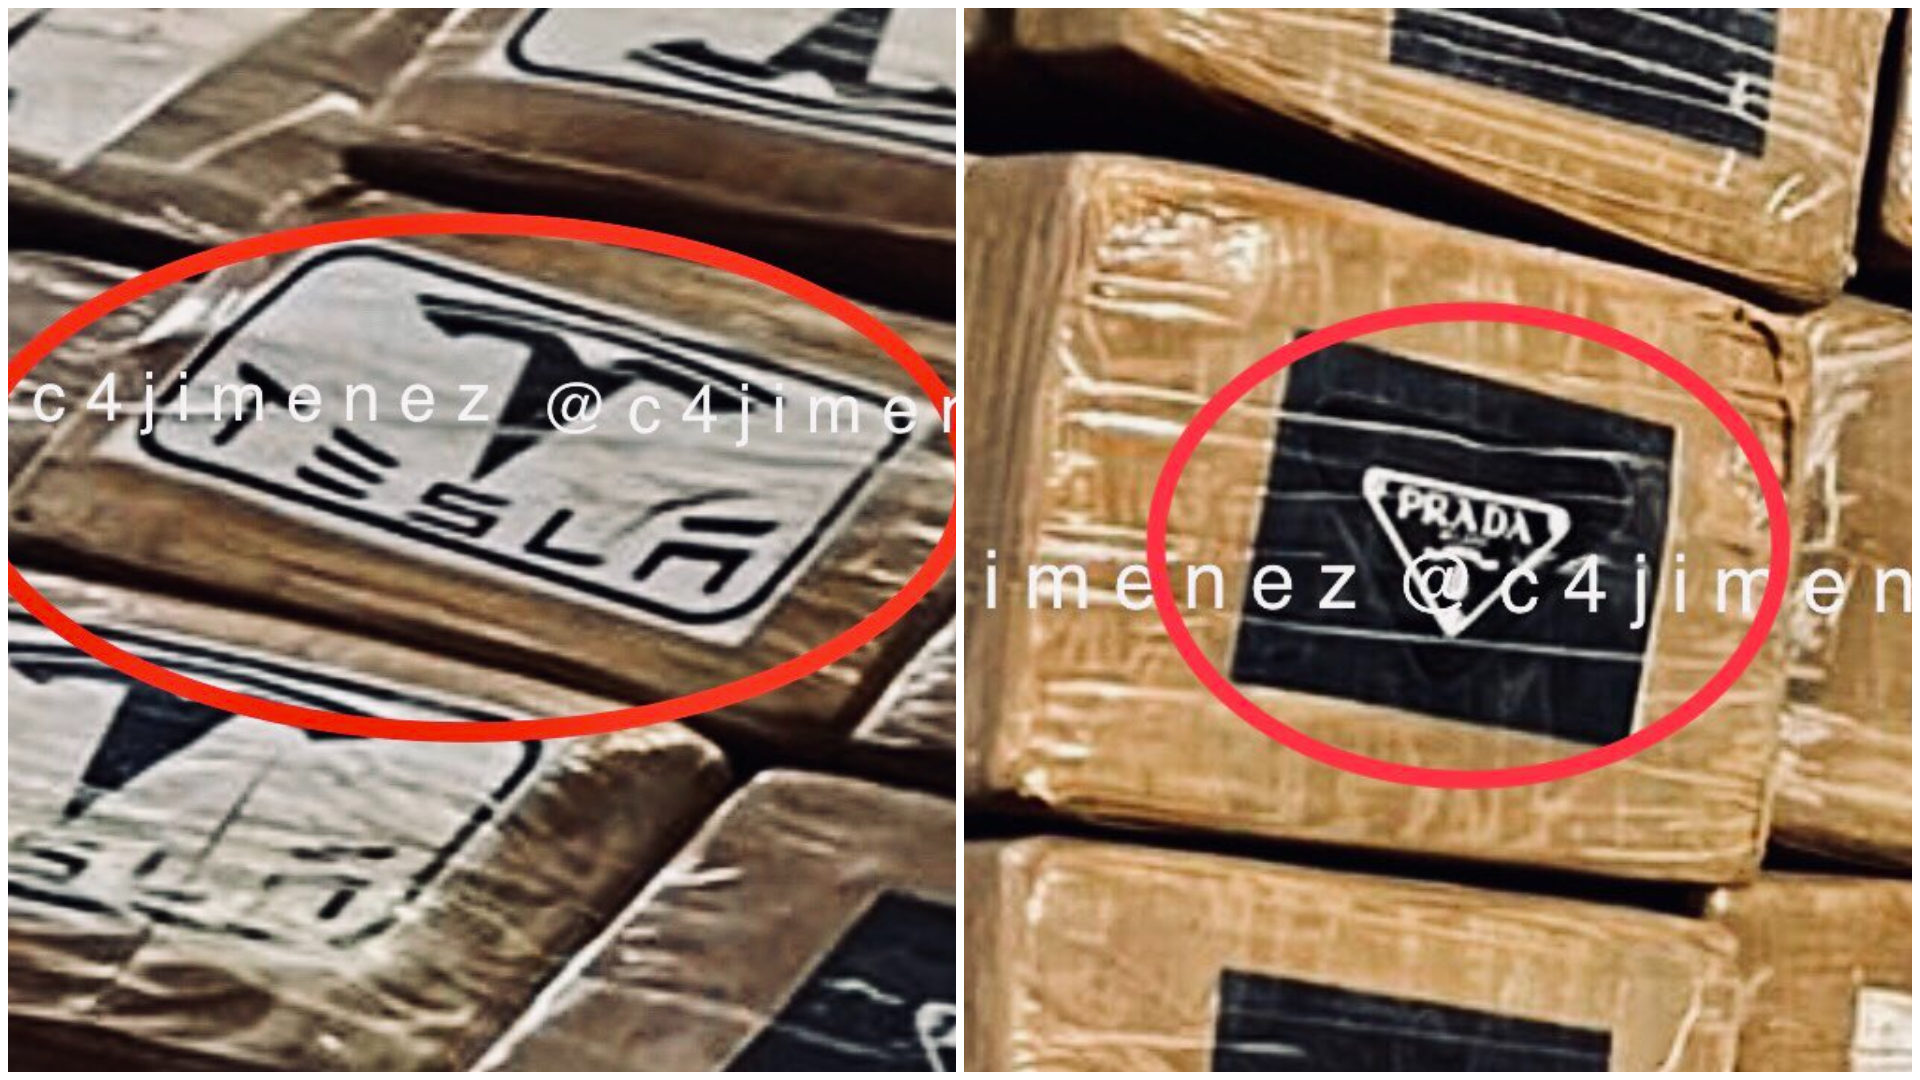 Seizure of cocaine in Mexico City, marked with Tesla and Prada (Photo: Twitter/@c4jimenez)